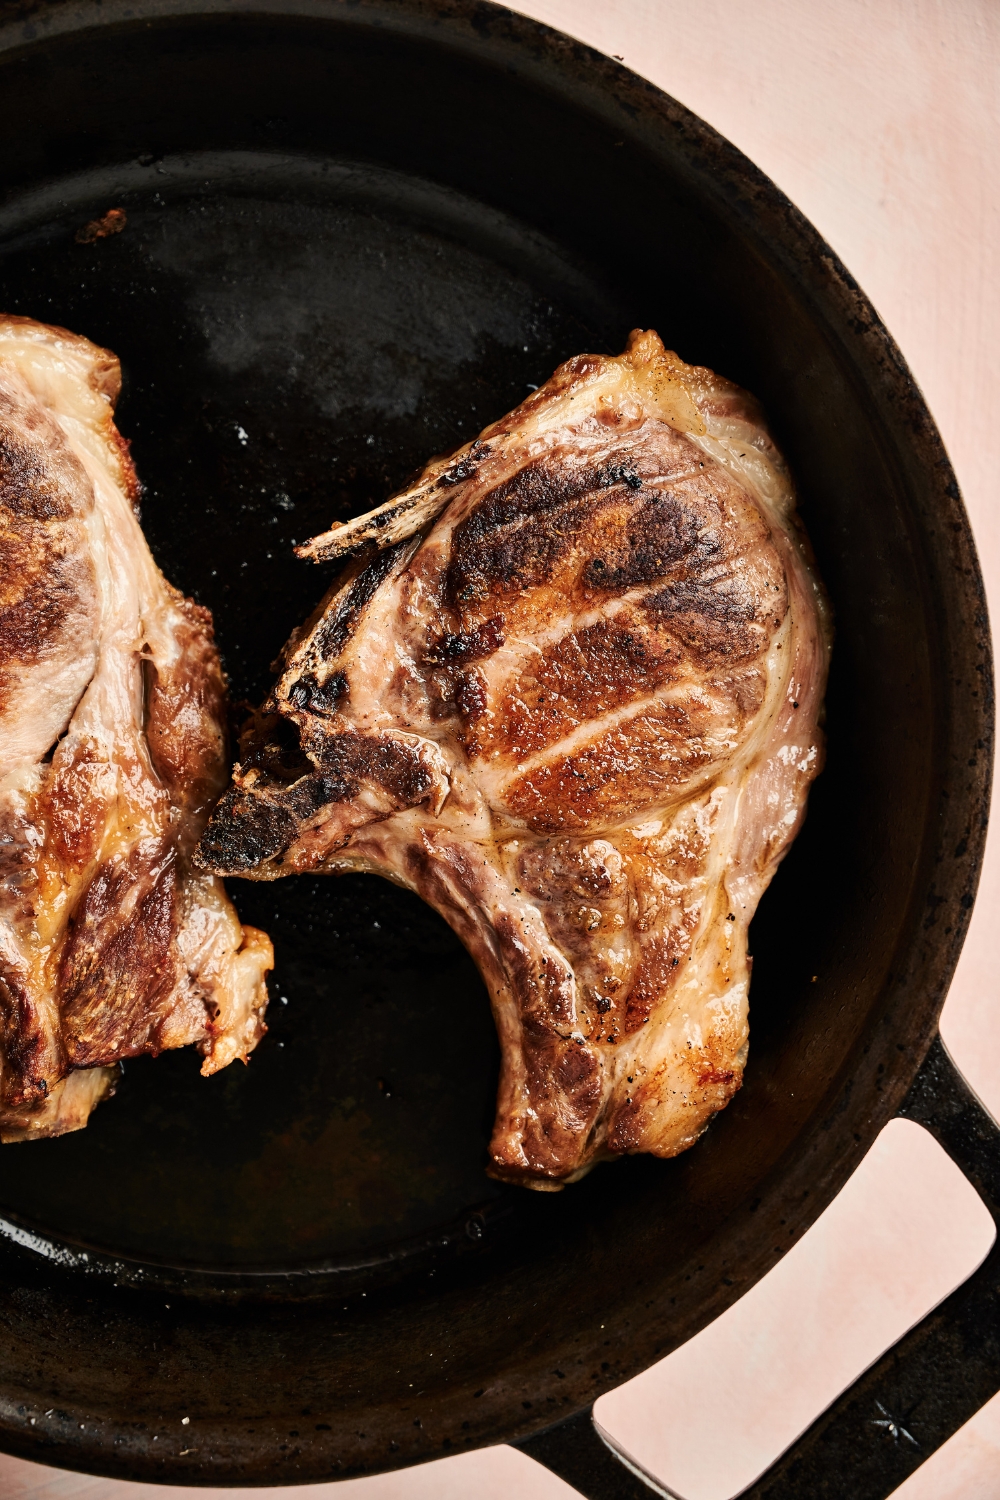 Two pork chops are in a black cast iron skillet. They are a golden brown color.